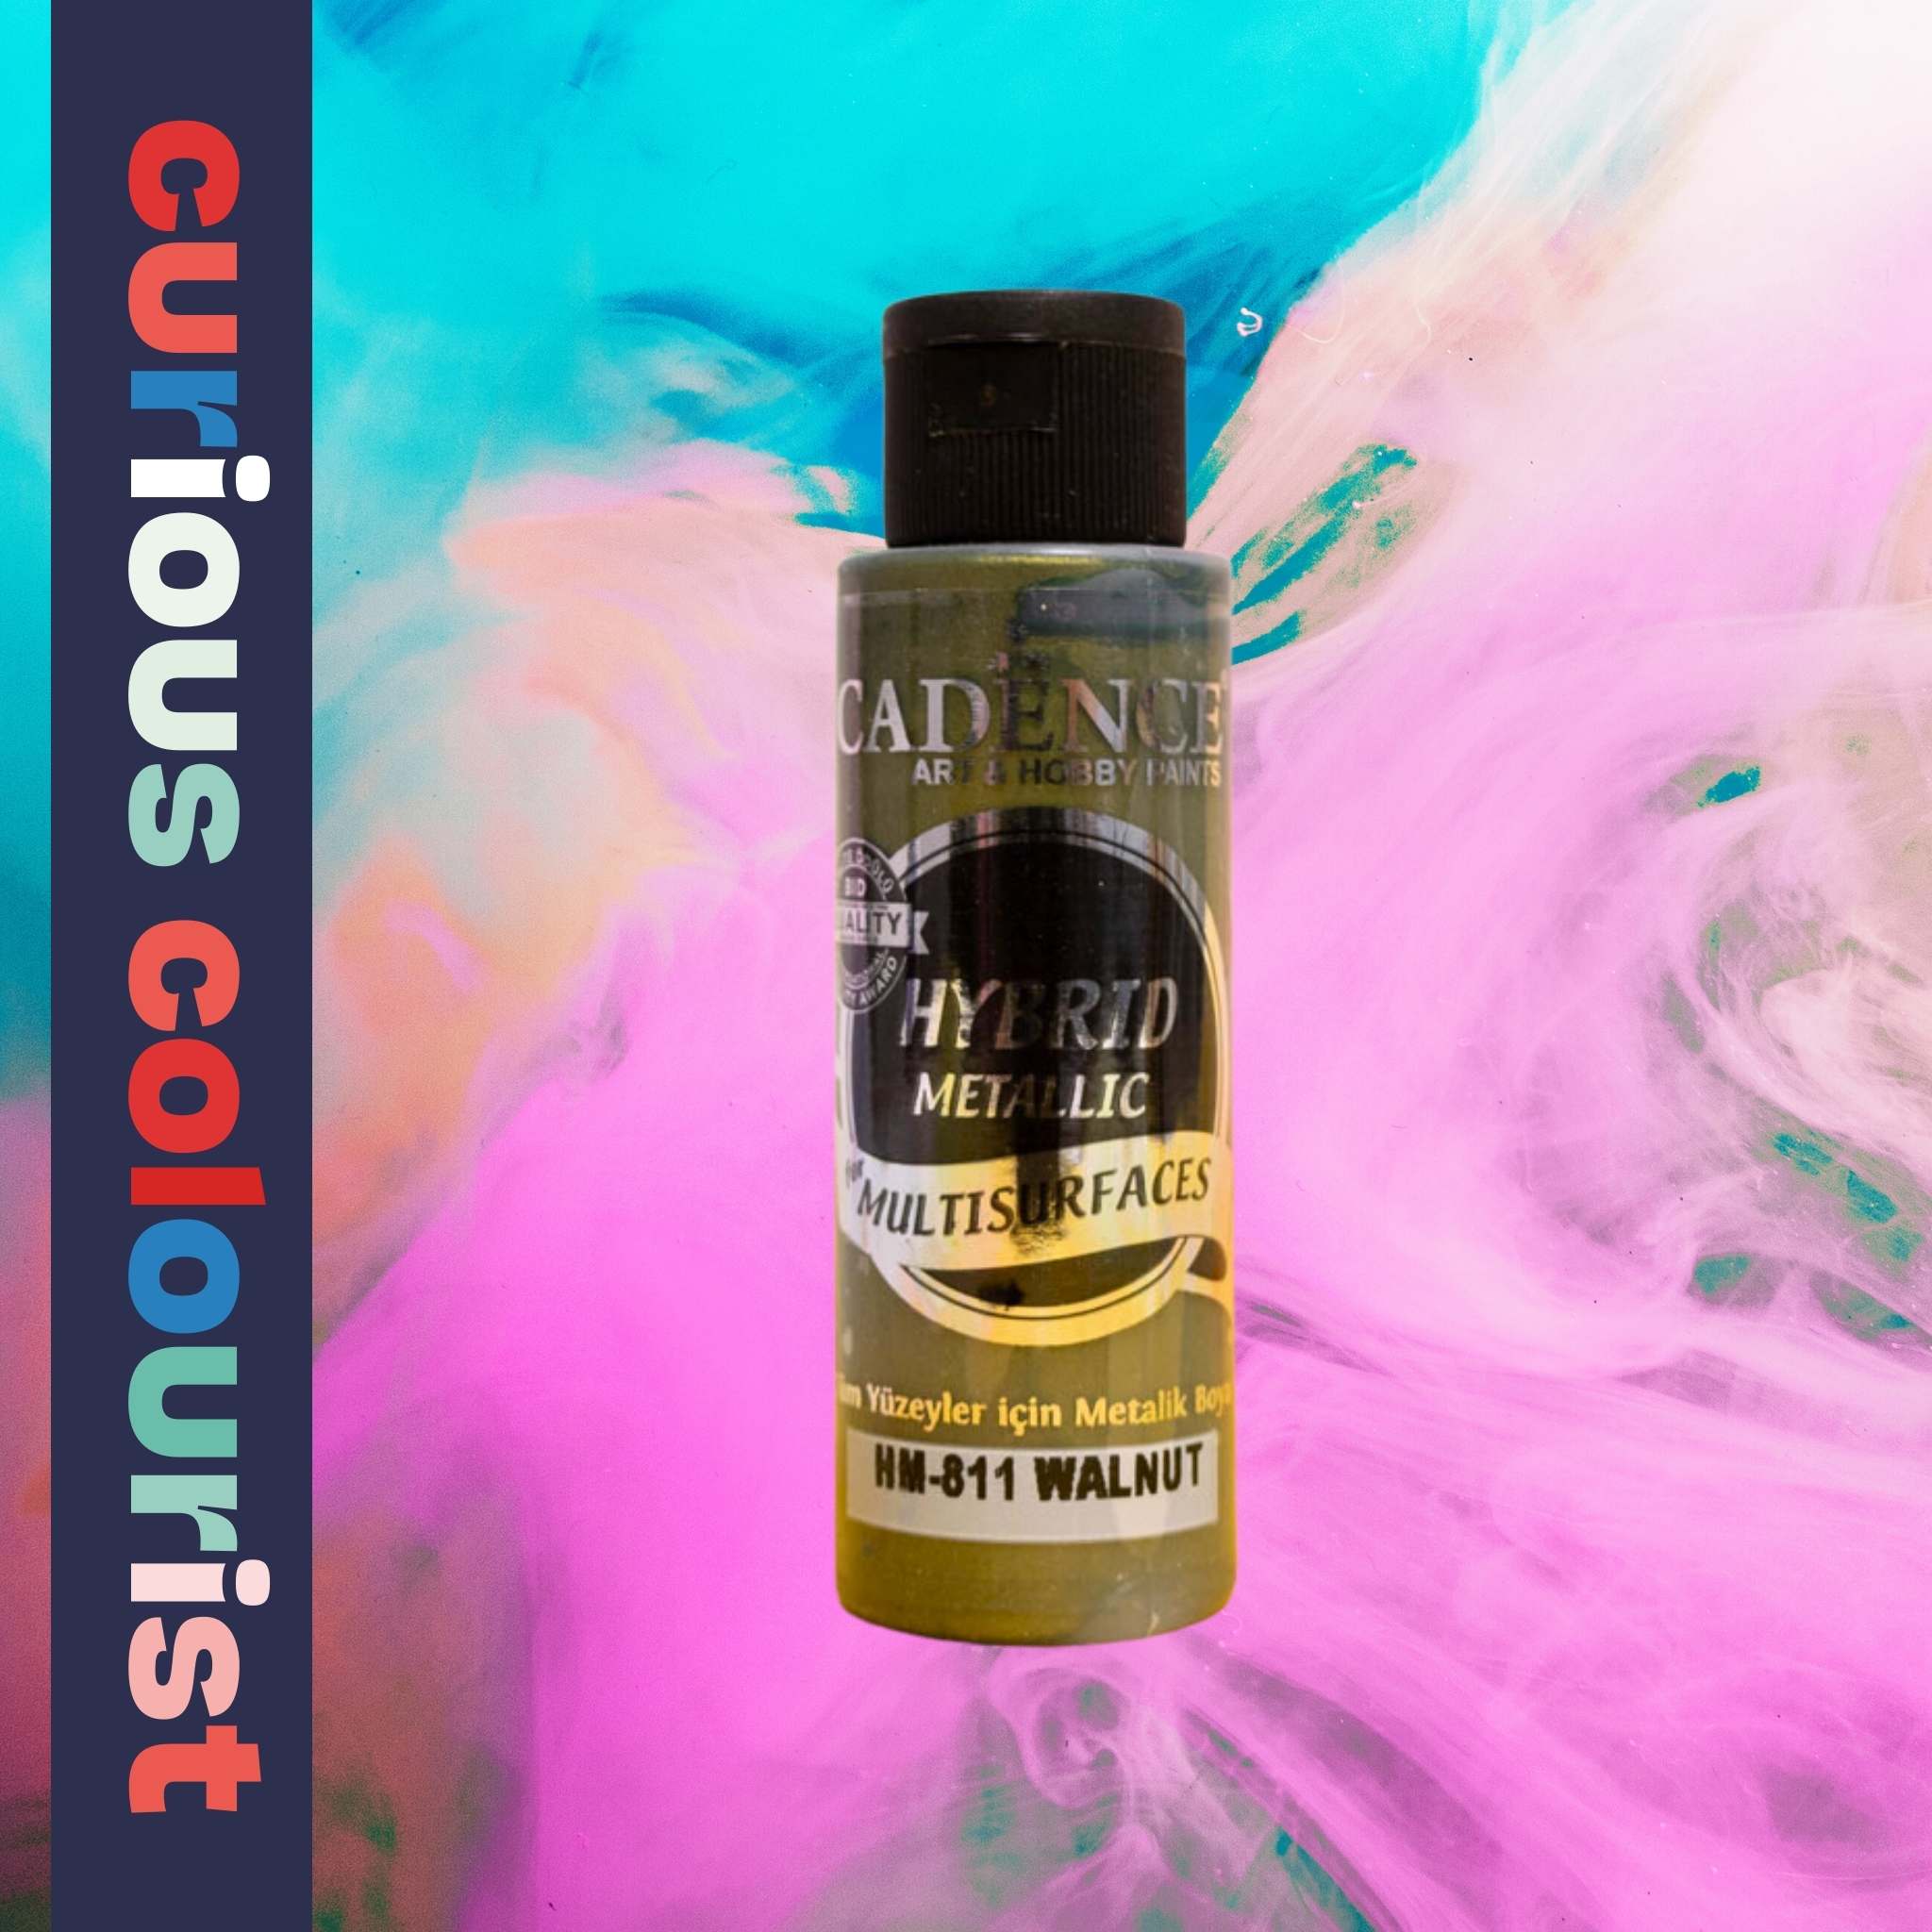 Walnut Satin effect metallic paint from Cadence, use for leather craft - make your leather projects pop with the addition of metallic effects, painting on leather to add highlights and shimmer.